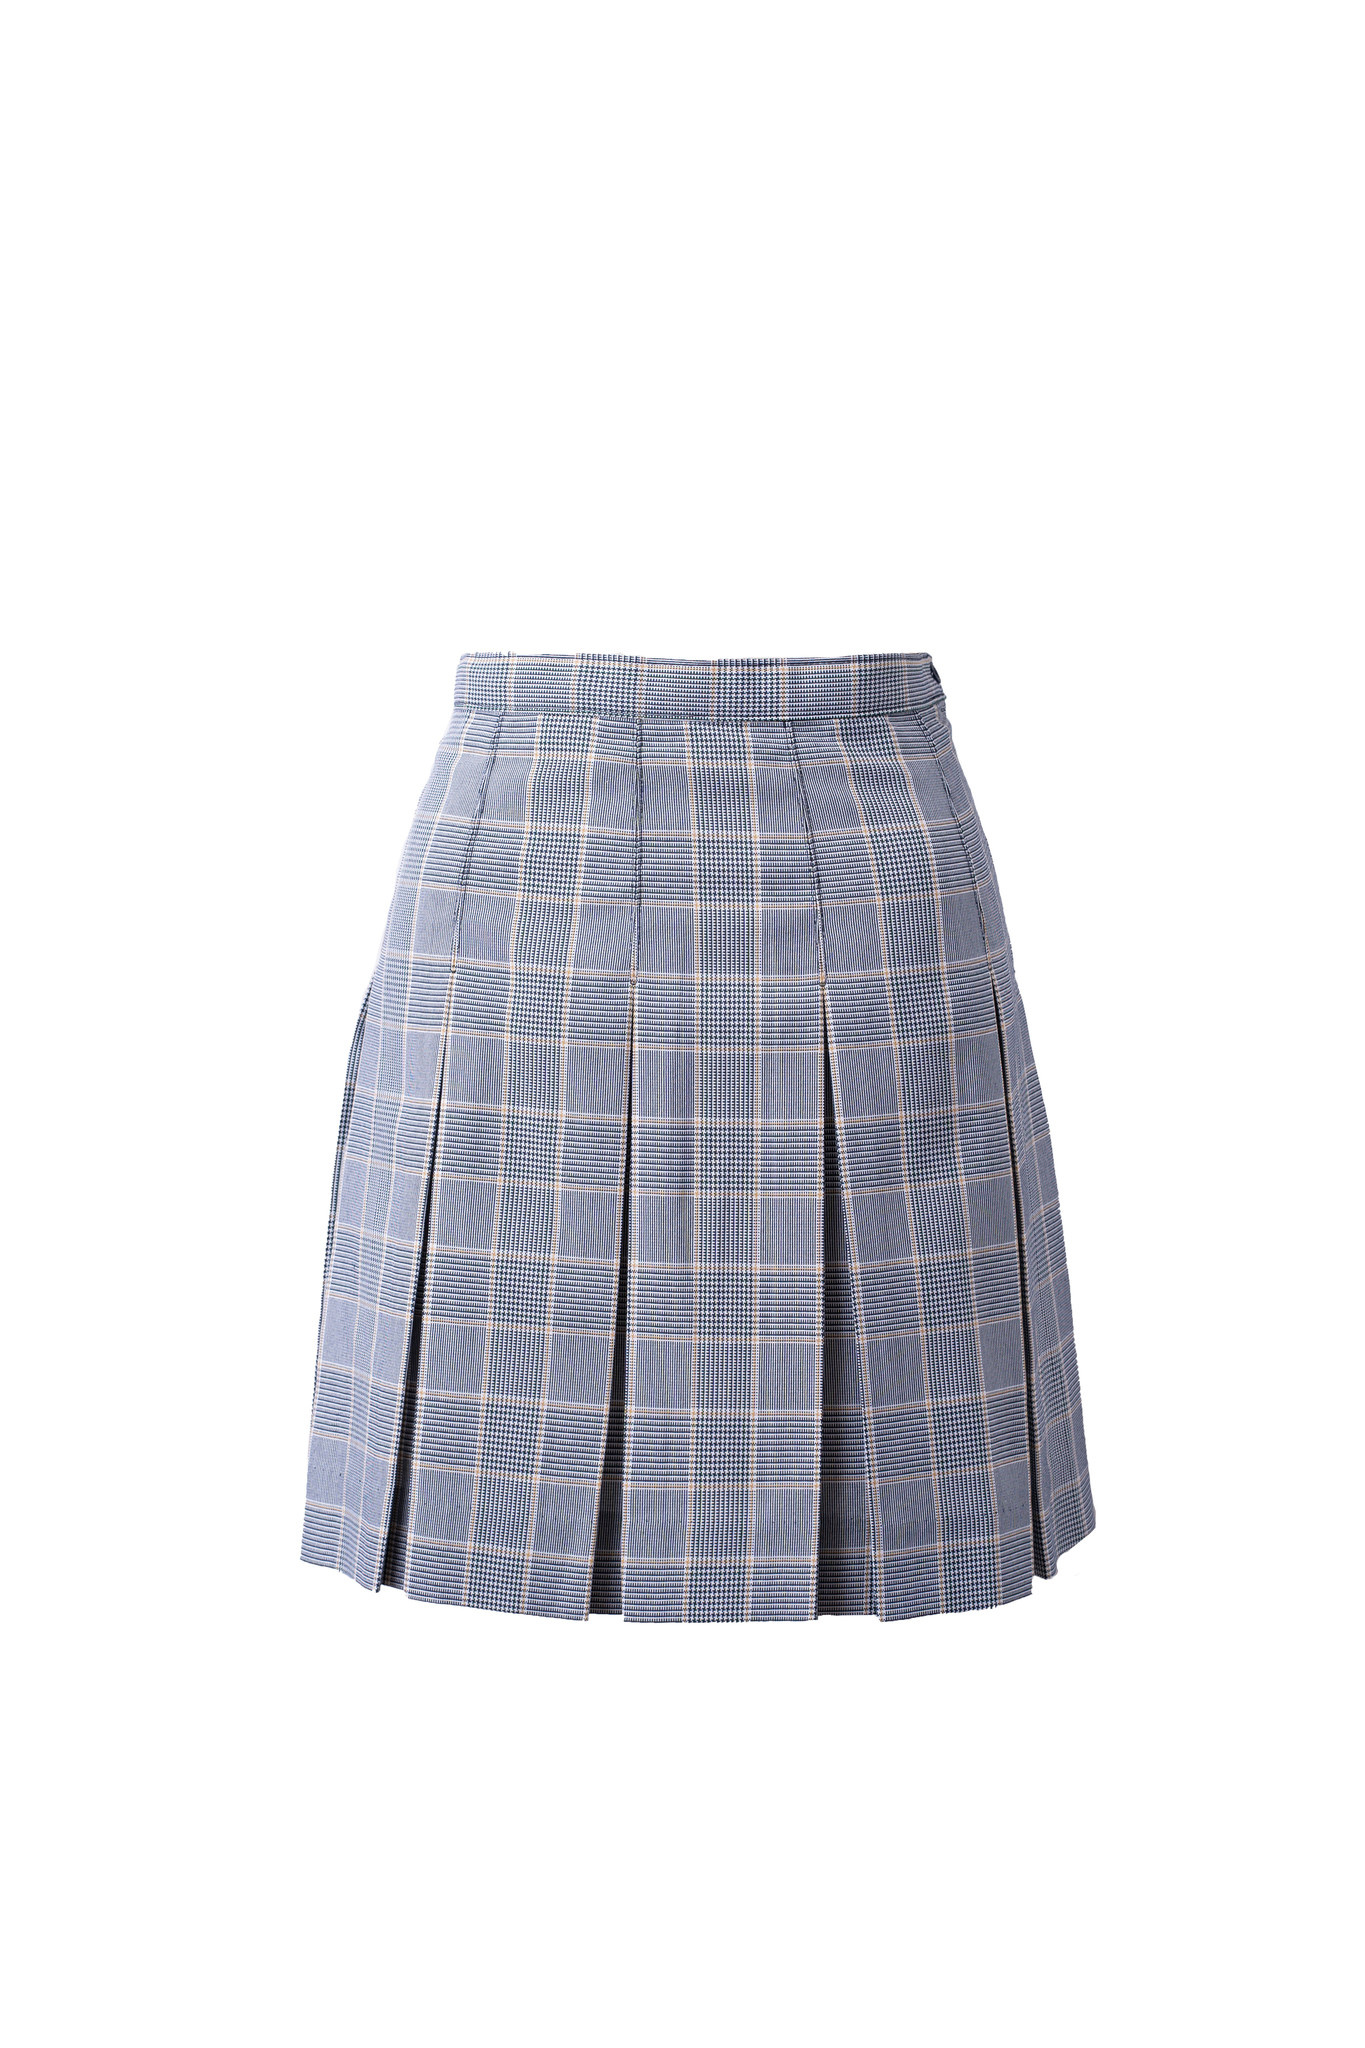 ST. LUCY St. Lucy's Priory High School Skirt